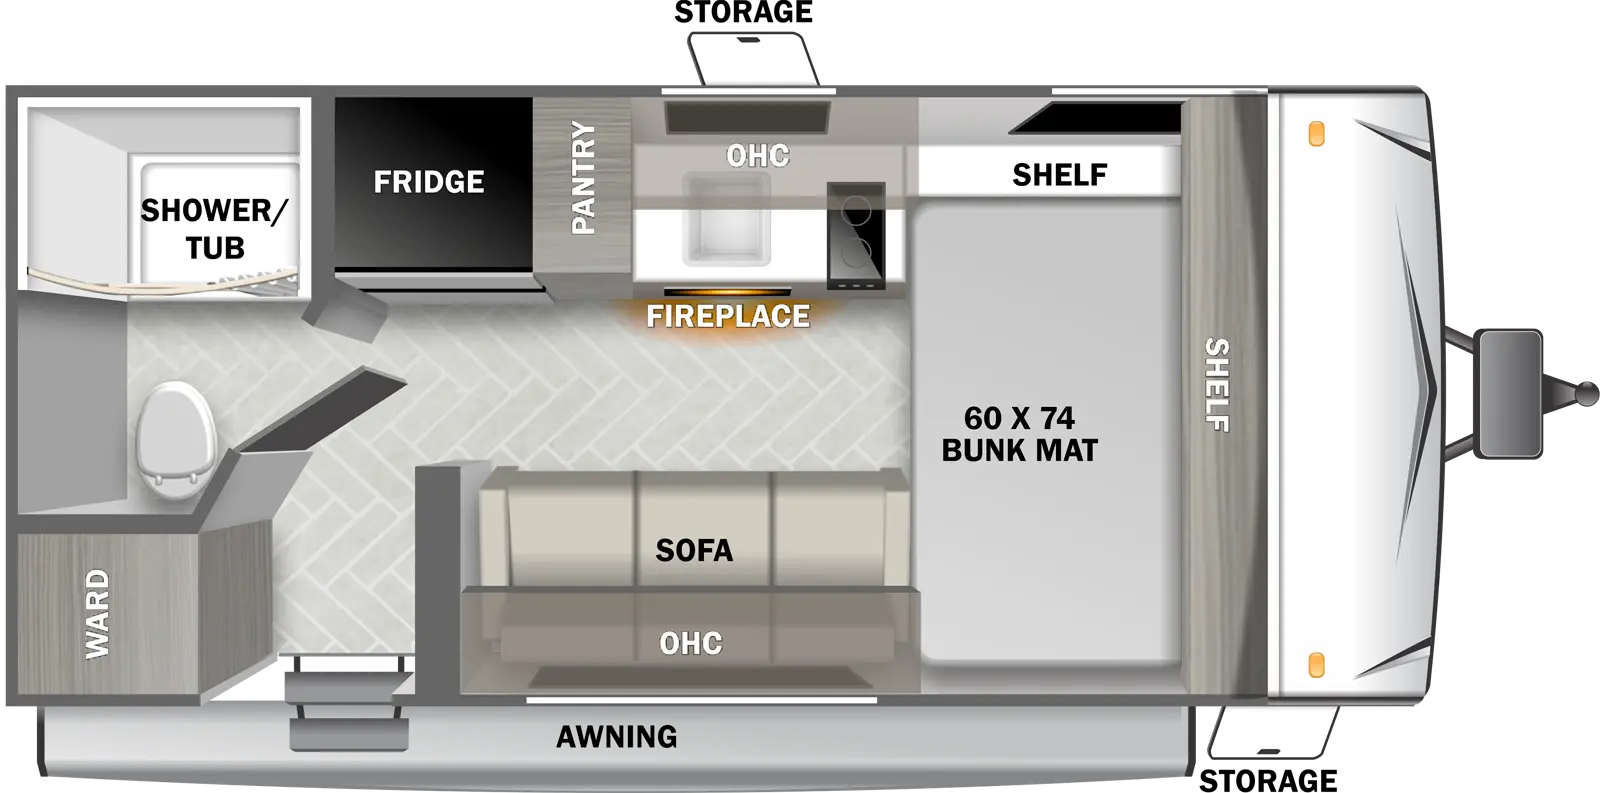 The T157FBGT has zero slideouts and one entry. Exterior features an awning and storage. Interior layout front to back: side-facing bunk mat with shelf along front wall and off-door side; door side sofa and overhead cabinet, and entry door; off-door side kitchen counter with cooktop, sink, overhead cabinet, pantry and refrigerator; rear wardrobe, and bathroom with toilet and shower/tub only.